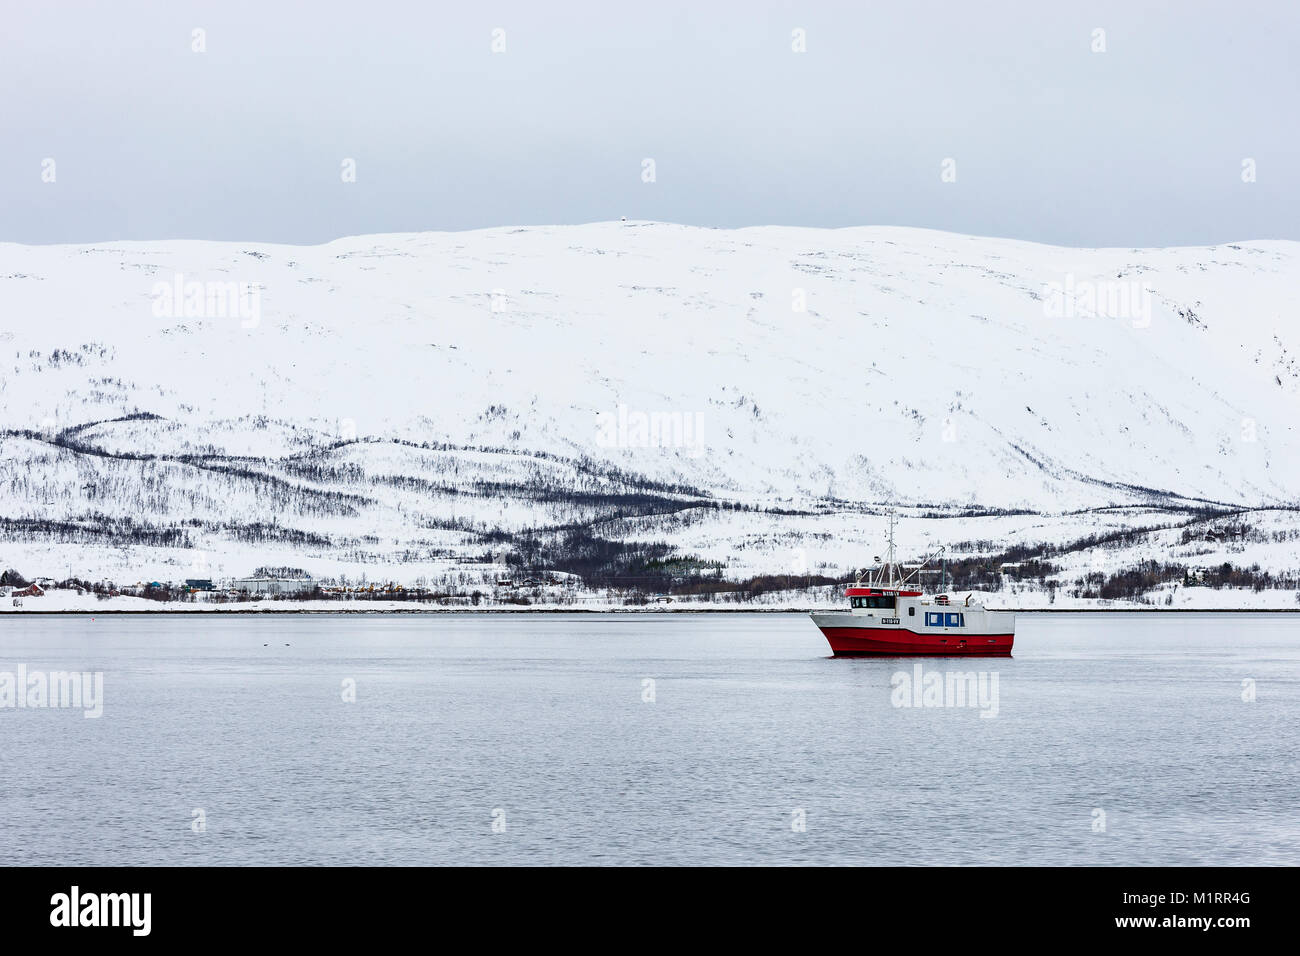 Norway. Norwegian fjord and shoreline with red and white fishing vessel sailing on it. Stock Photo